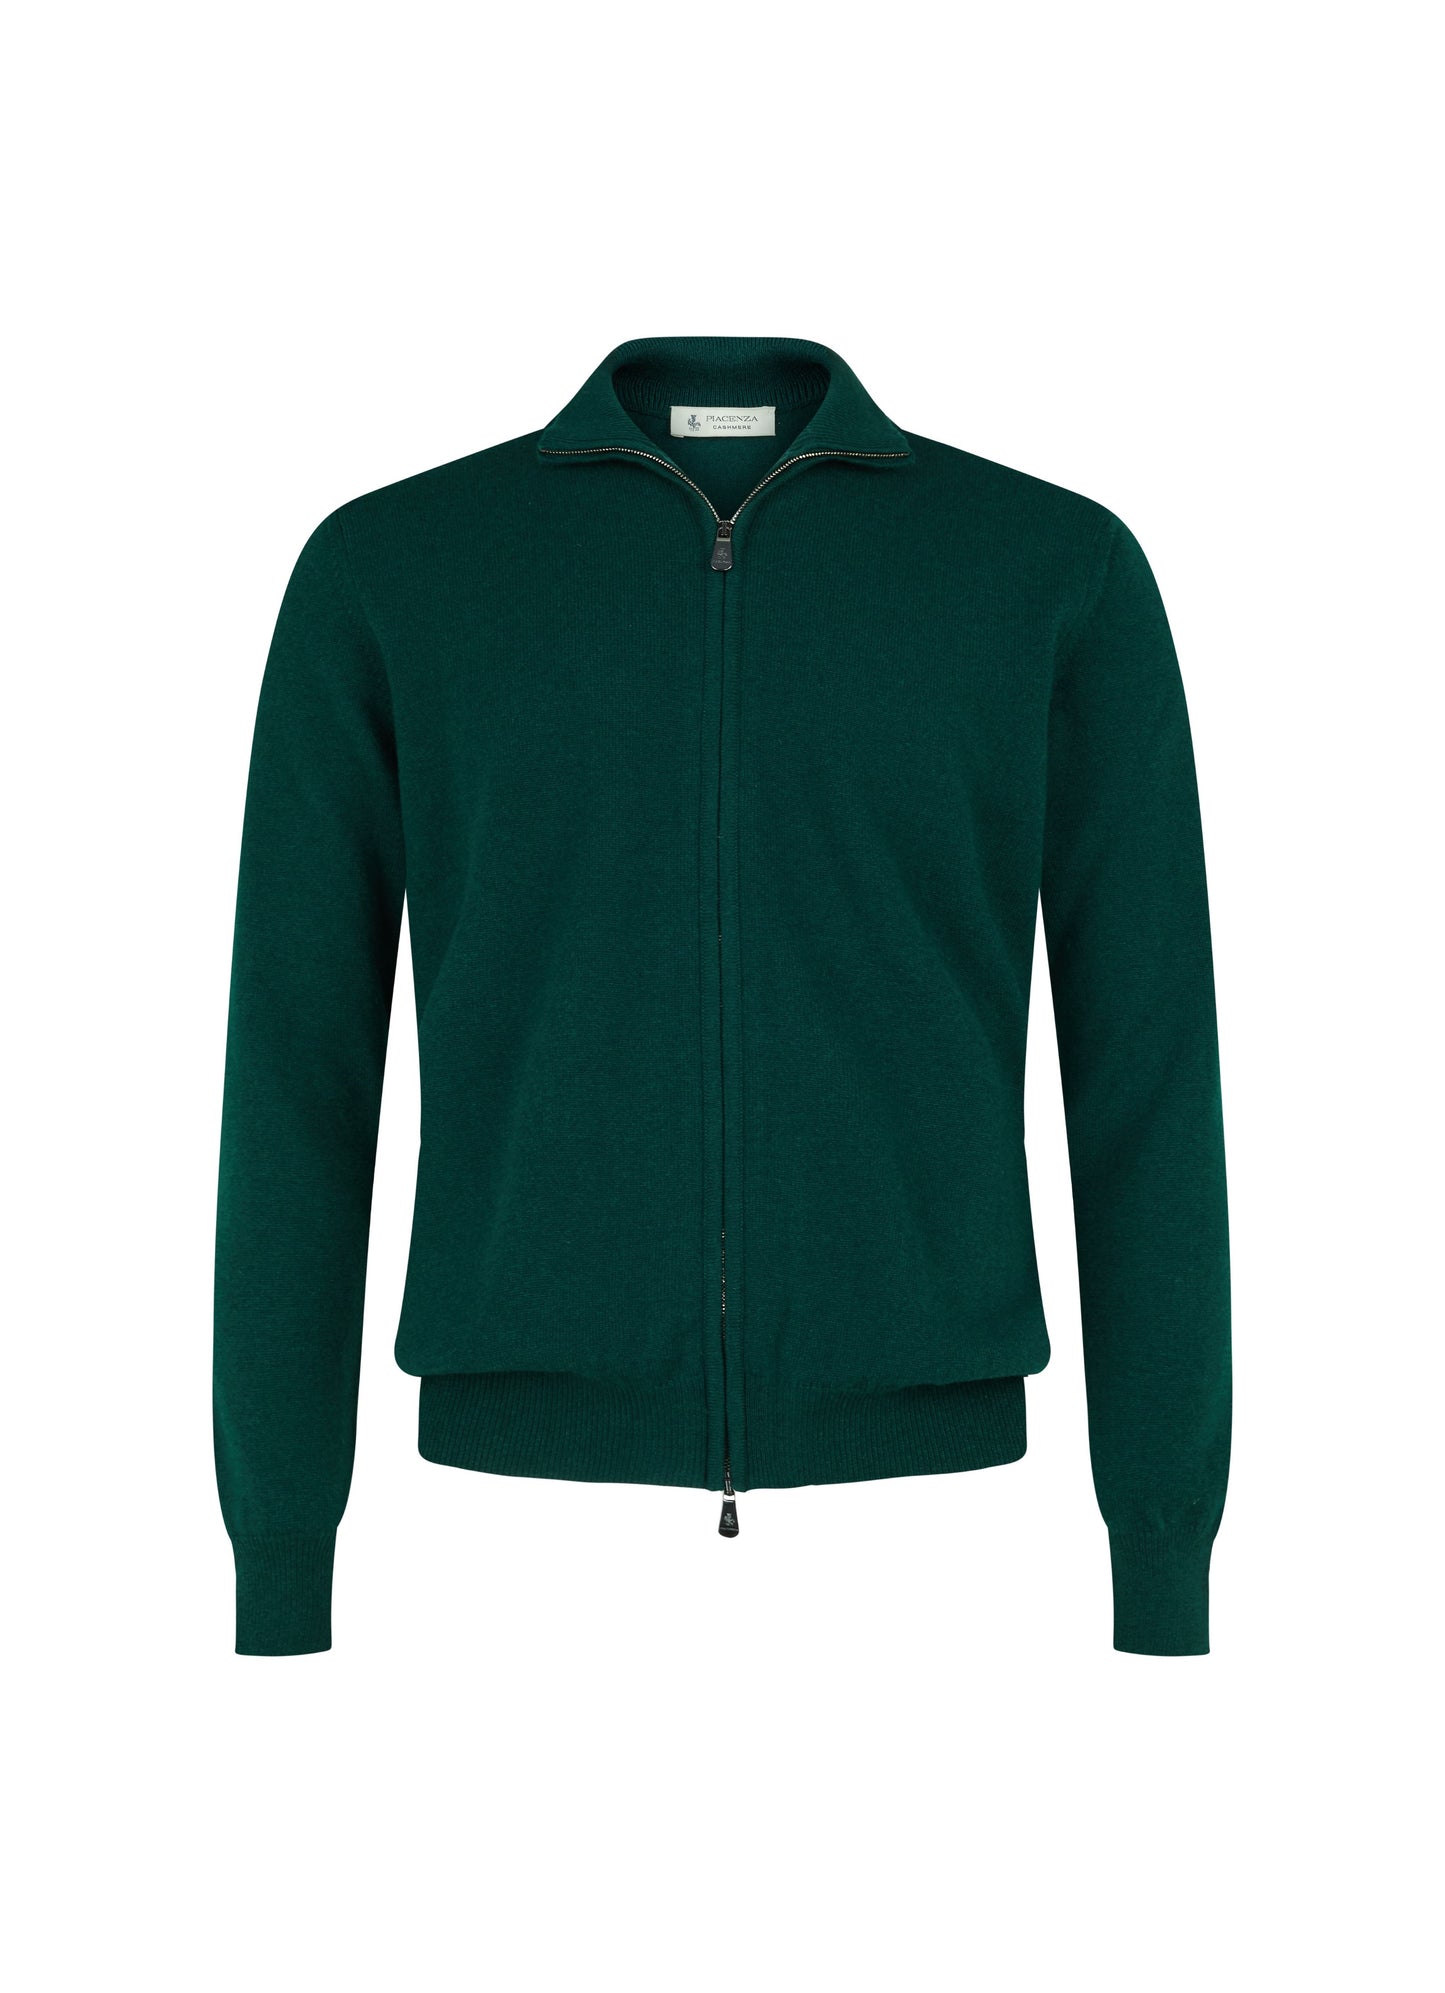 Cardigan with Green Zip in pure cashmere